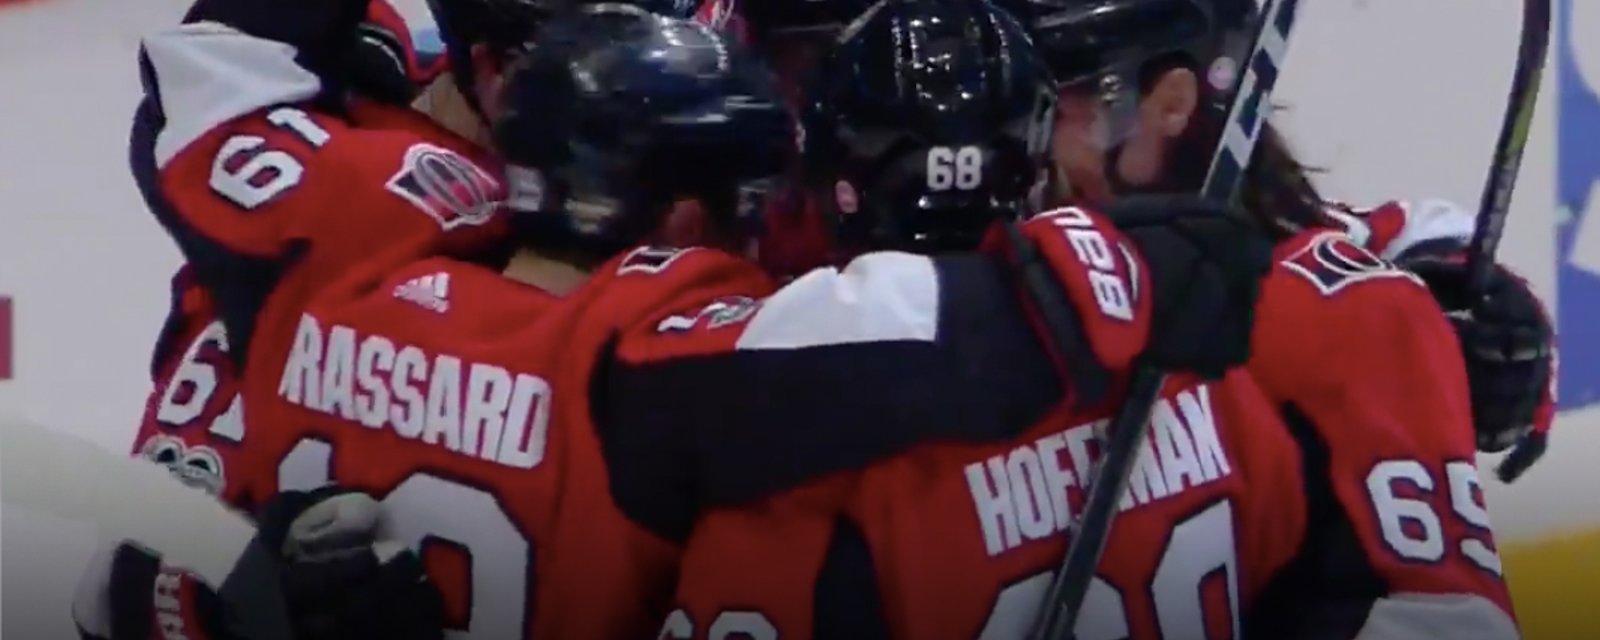 Must see: Hoffman scores one of the luckiest goals you'll ever see!